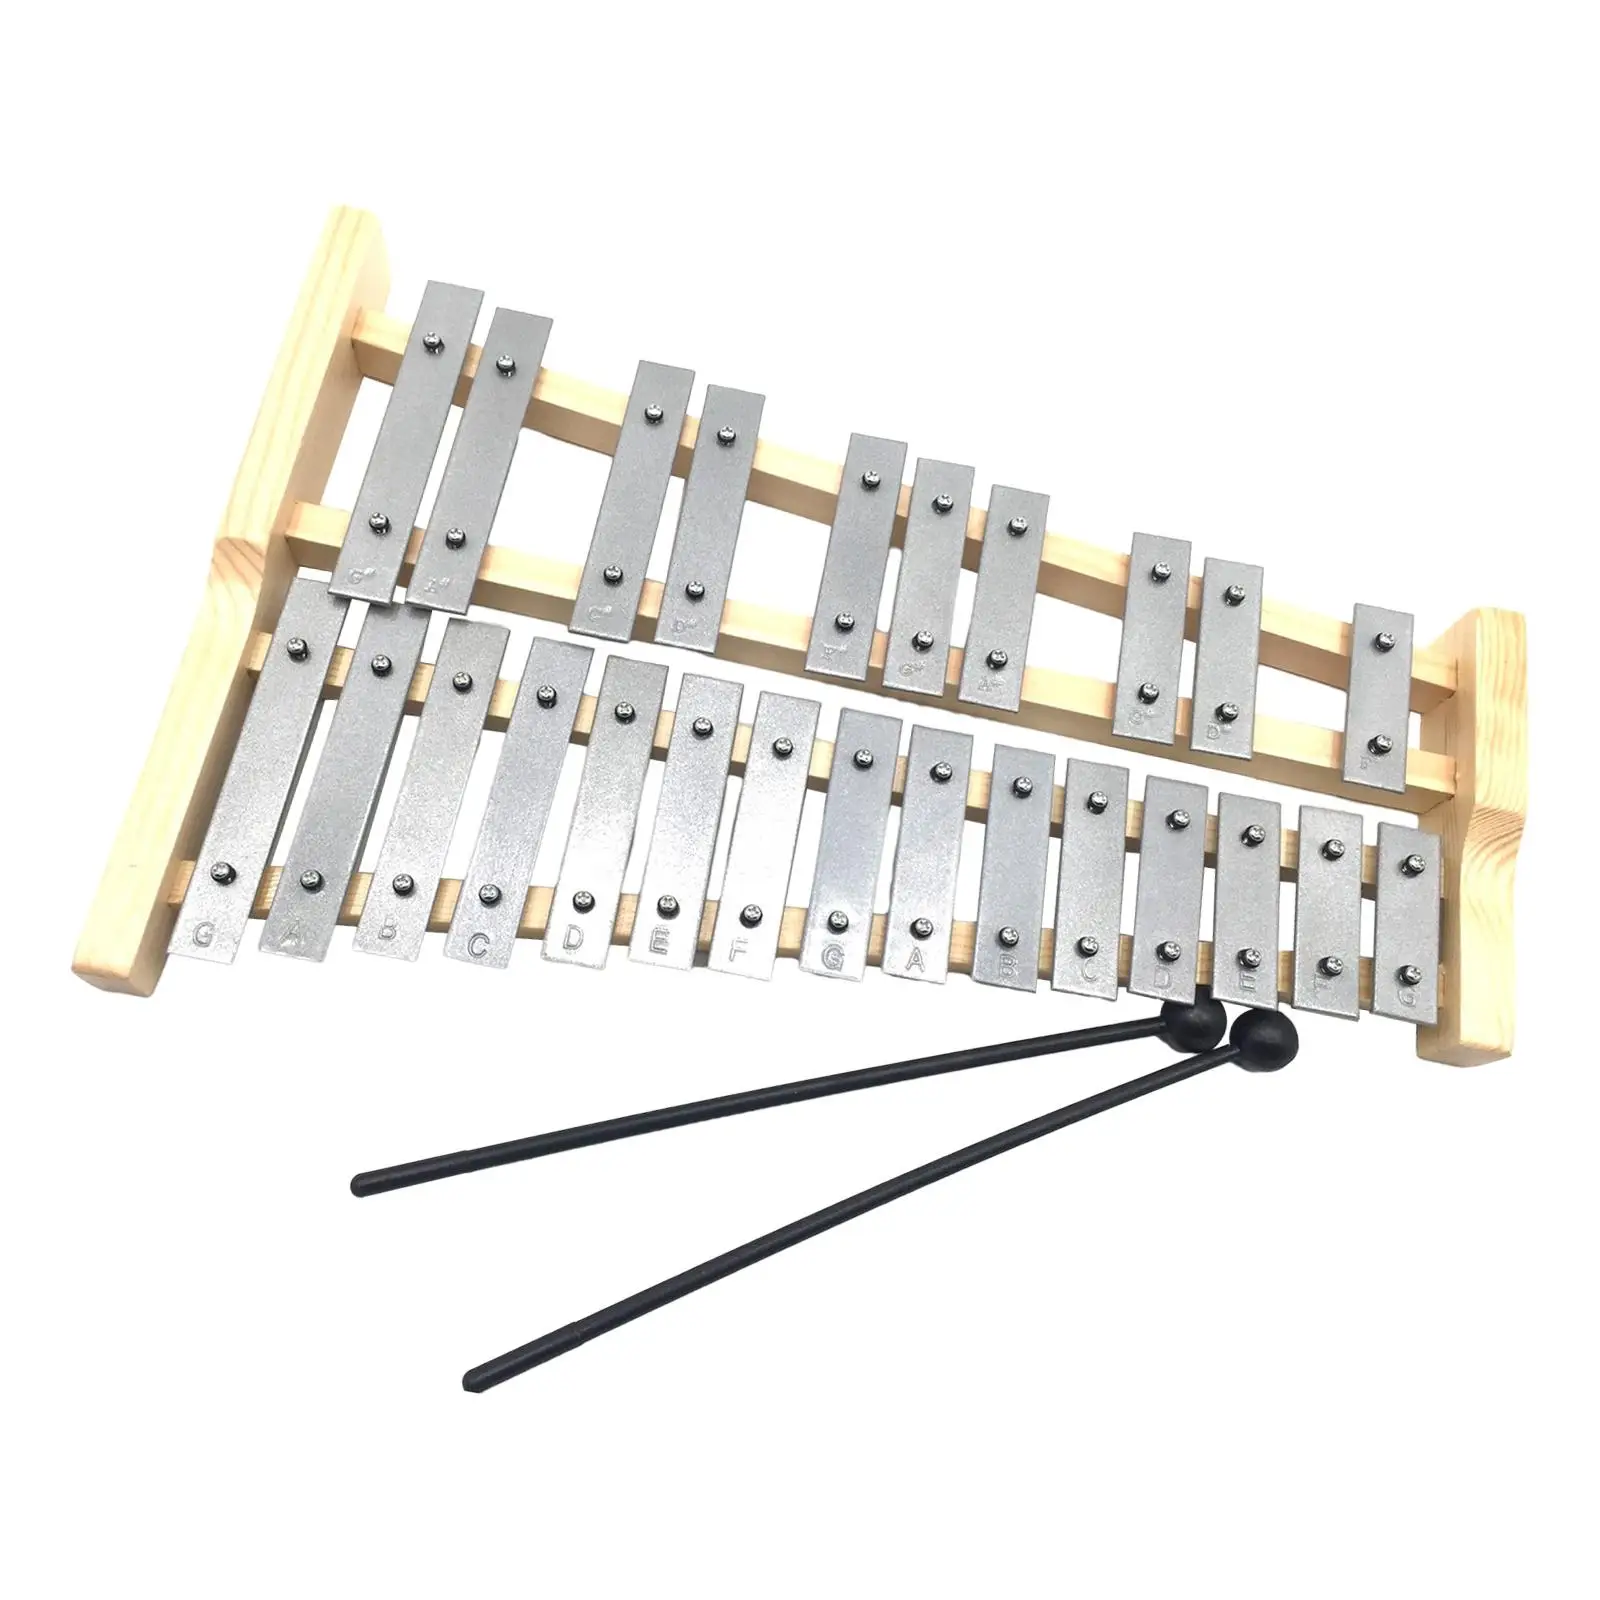 Xylophone Compact Wooden Frame for Beginners 25 Key Glockenspiel Percussion Instrument Musical Educational Tuned Glockenspiel